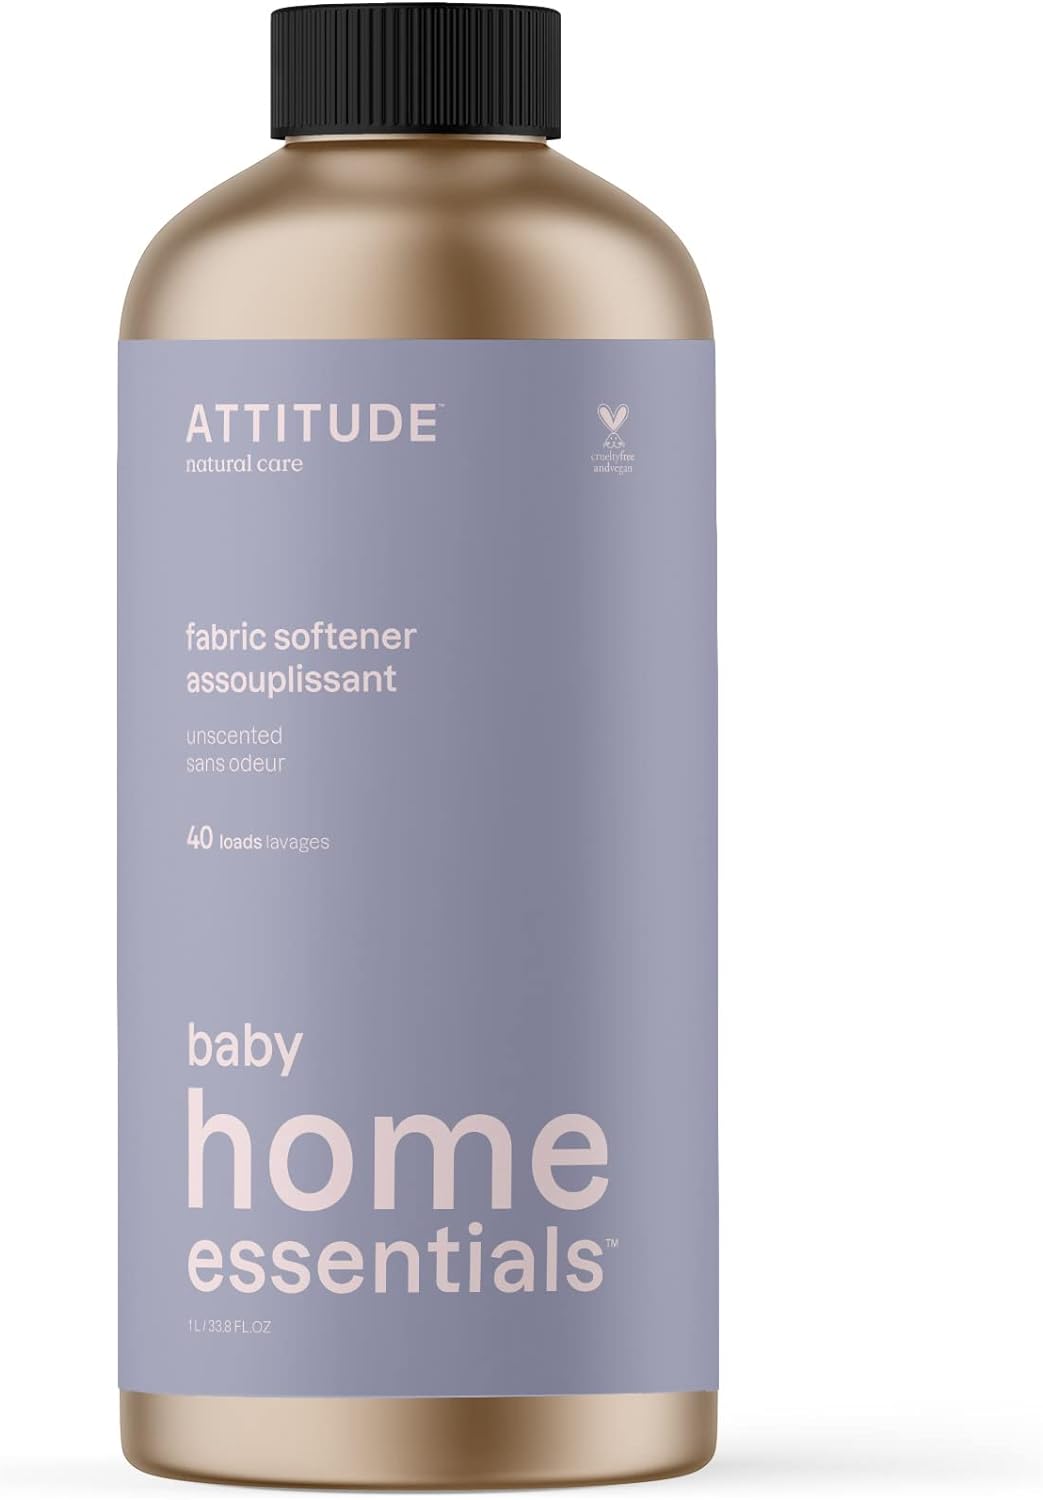 ATTITUDE Baby Laundry Fabric Softener Liquid, Vegan and Naturally Derived Detergent, Plant Based, HE Washing Machine Compatible, Refillable Aluminum Bottle, 40 Loads, Unscented, 33.8 Fl Oz